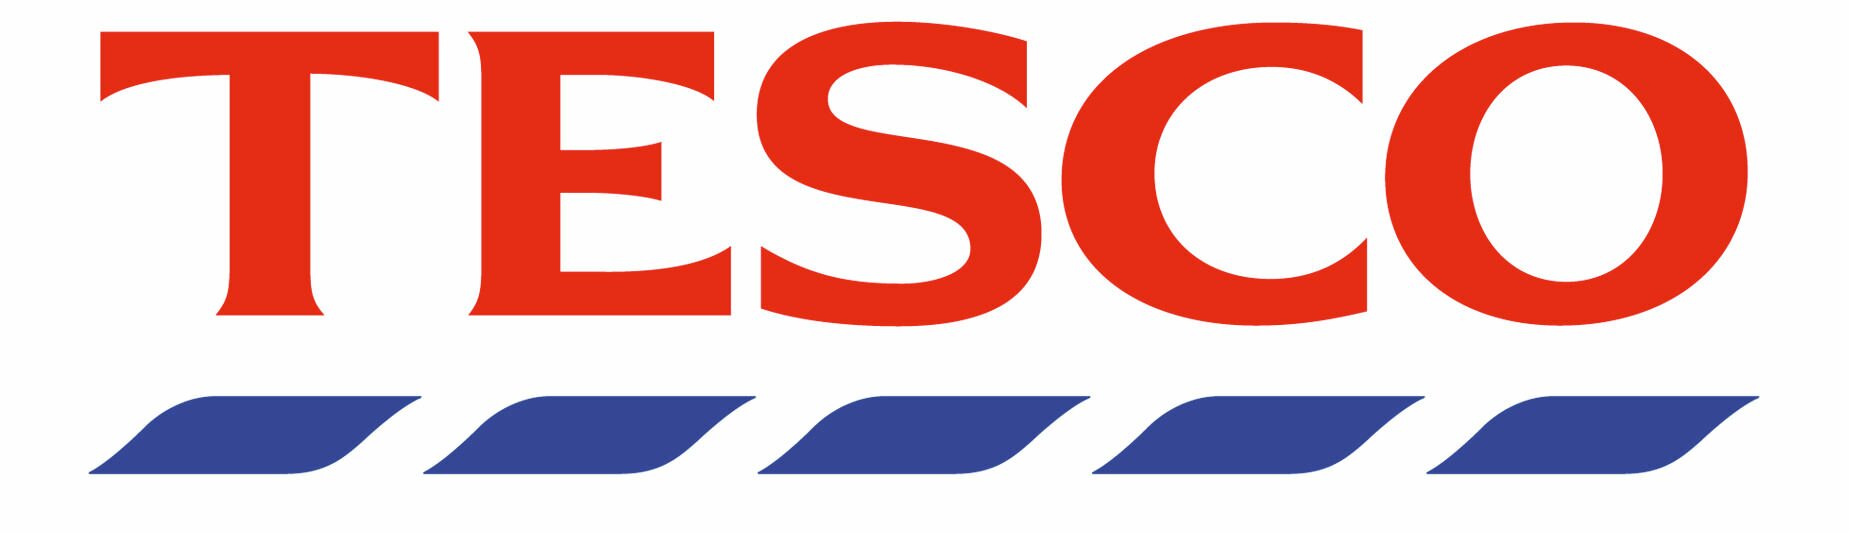 Tesco logo - relating to an accident at work incident at a Tesco store in Wallasey